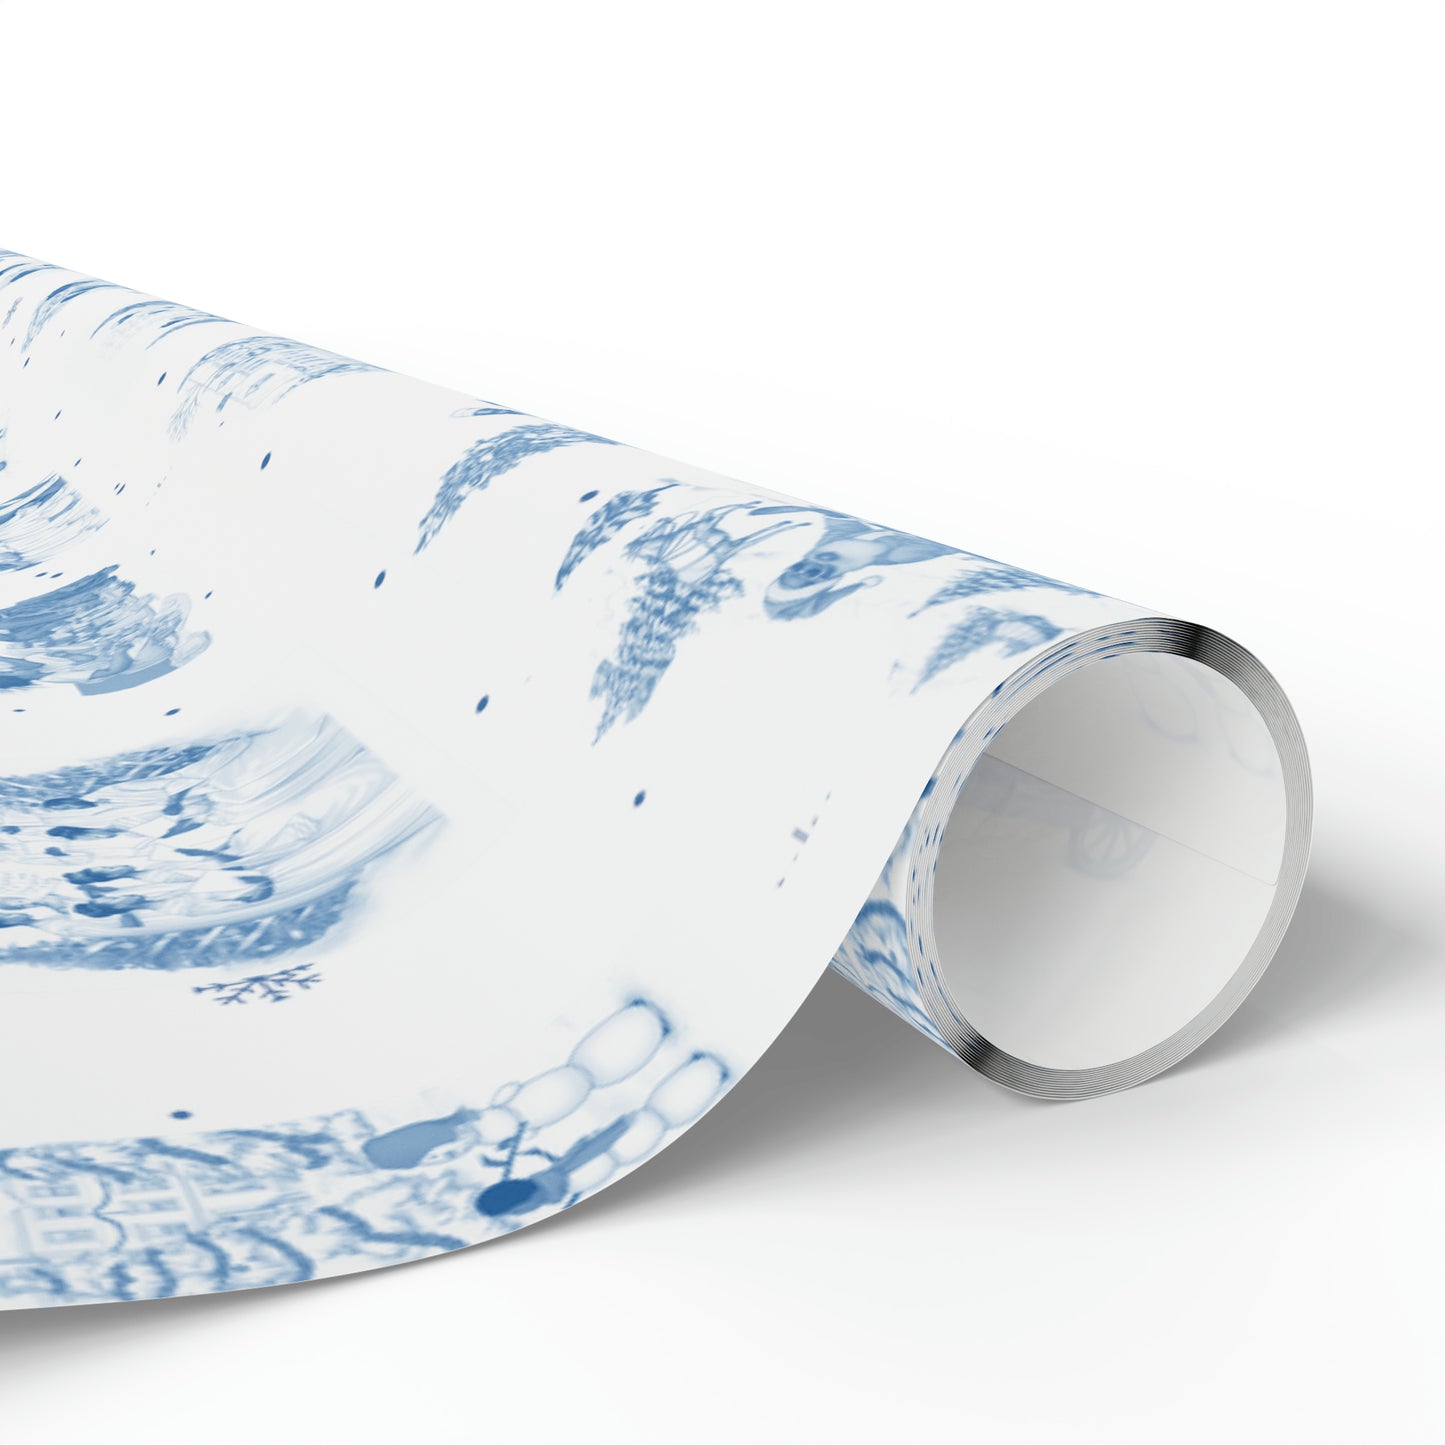 Limited Edition Holiday Toile - Blue